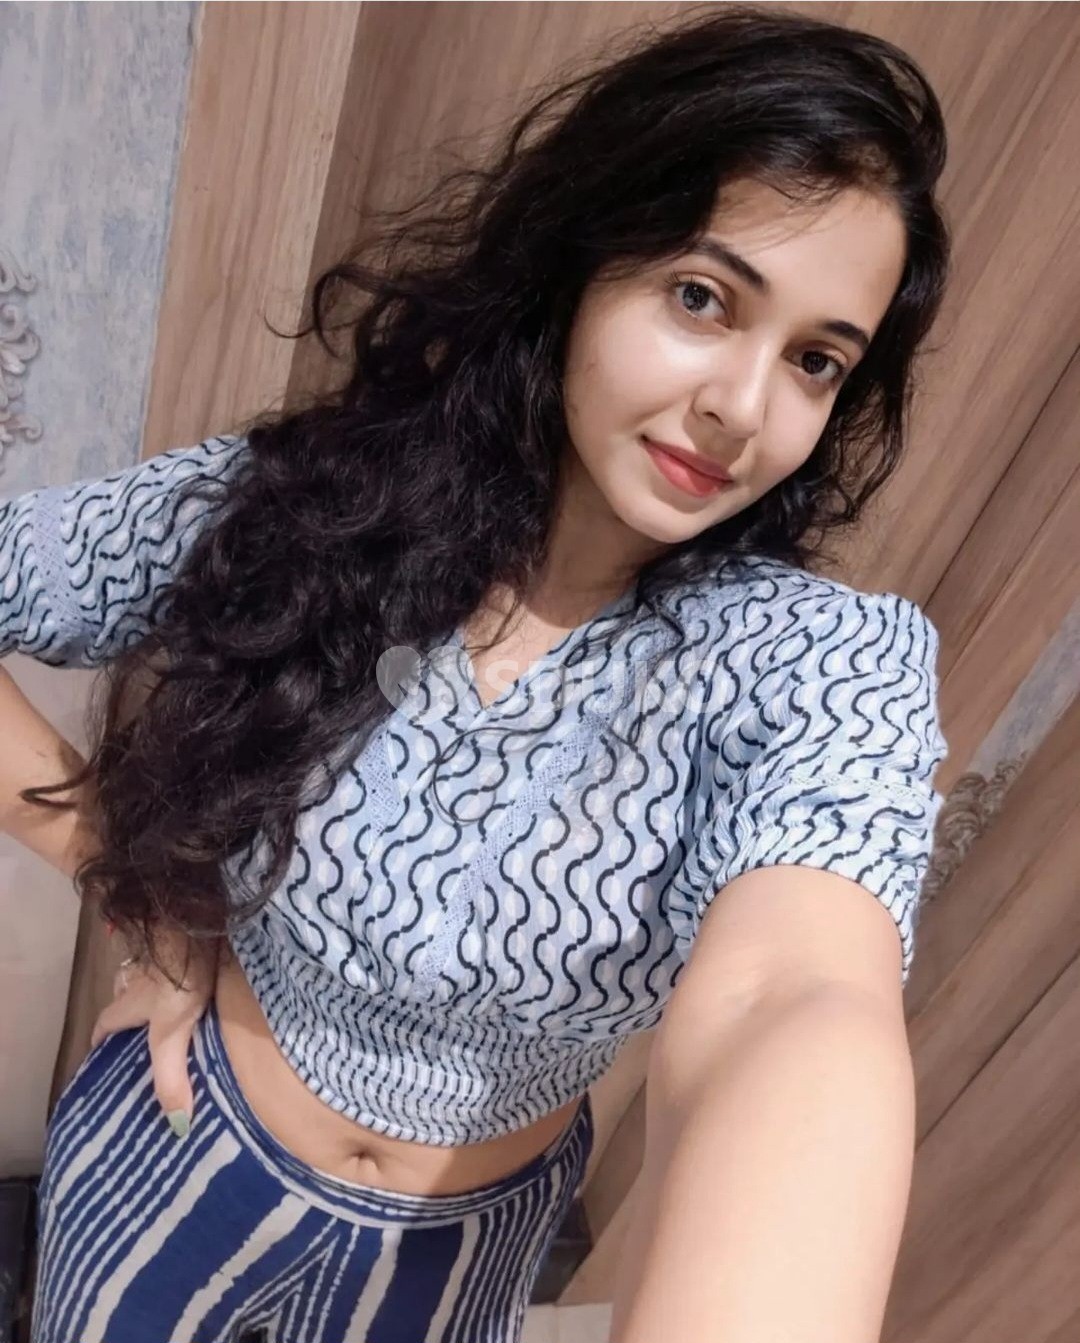 Koramangala ✅ 24x7 AFFORDABLE CHEAPEST RATE SAFE CALL GIRL SERVICE AVAILABLE OUTCALL AVAILABLE.,